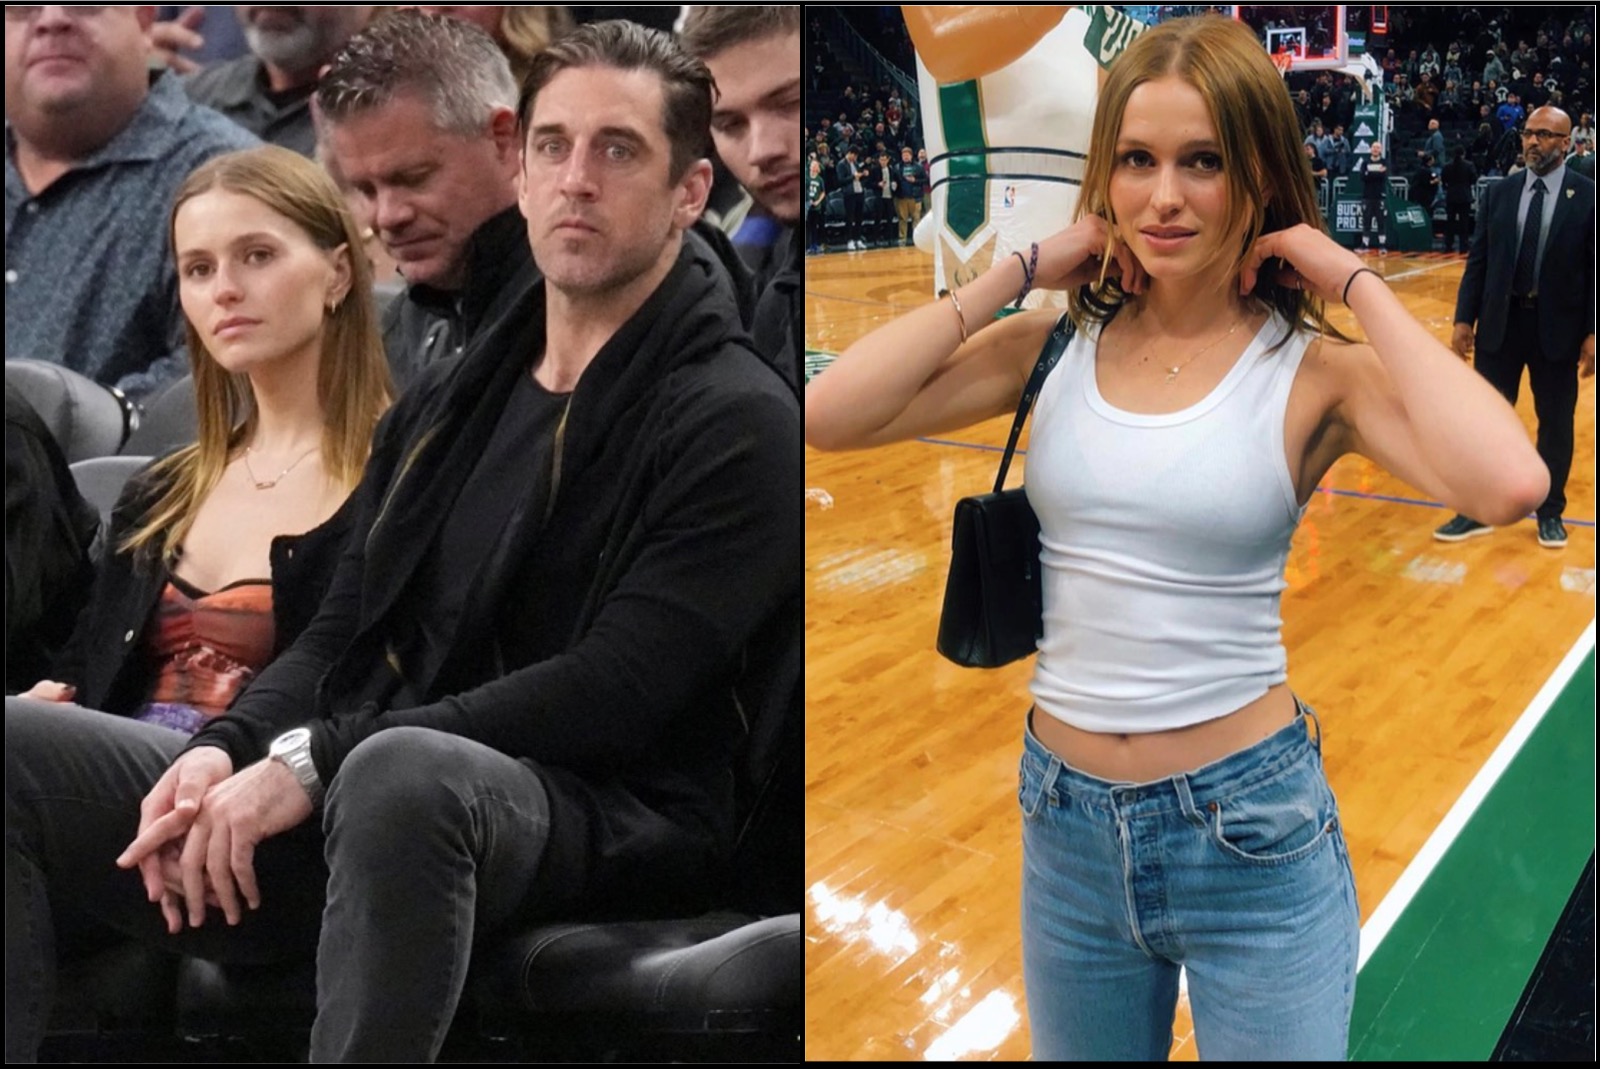 Jets QB Aaron Rodgers and Bucks Owner Mallory Edens Go Out on Date at ...